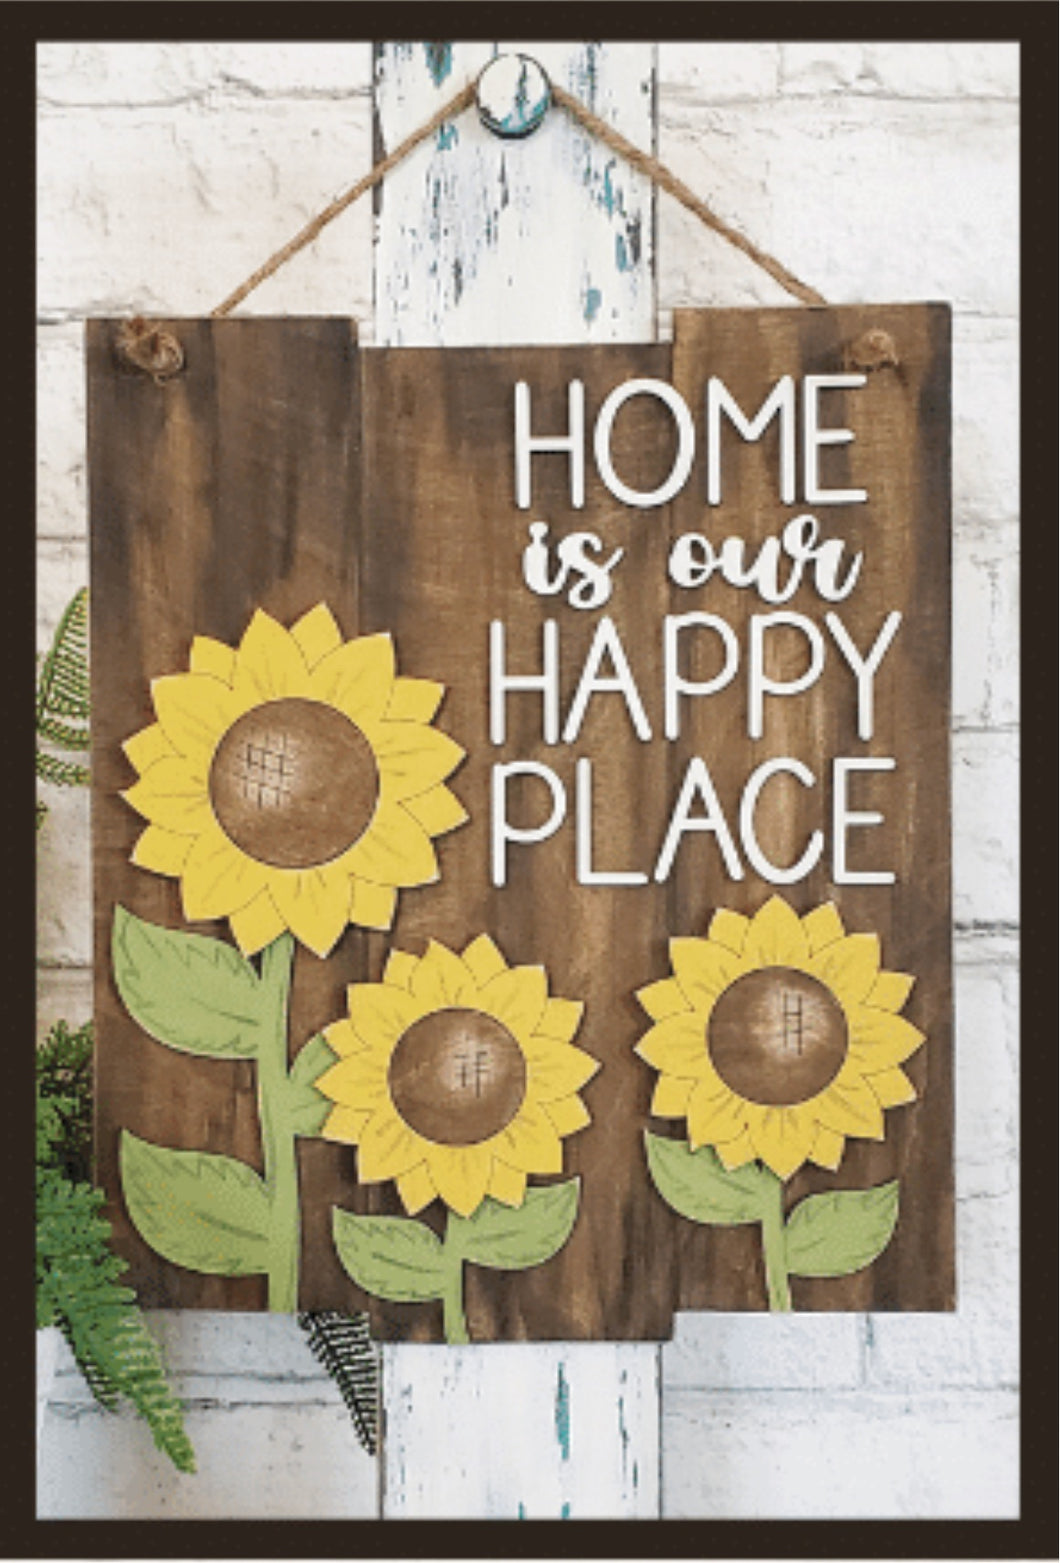 Home is our Happy Place - Paint a Sign Night 6.20.23